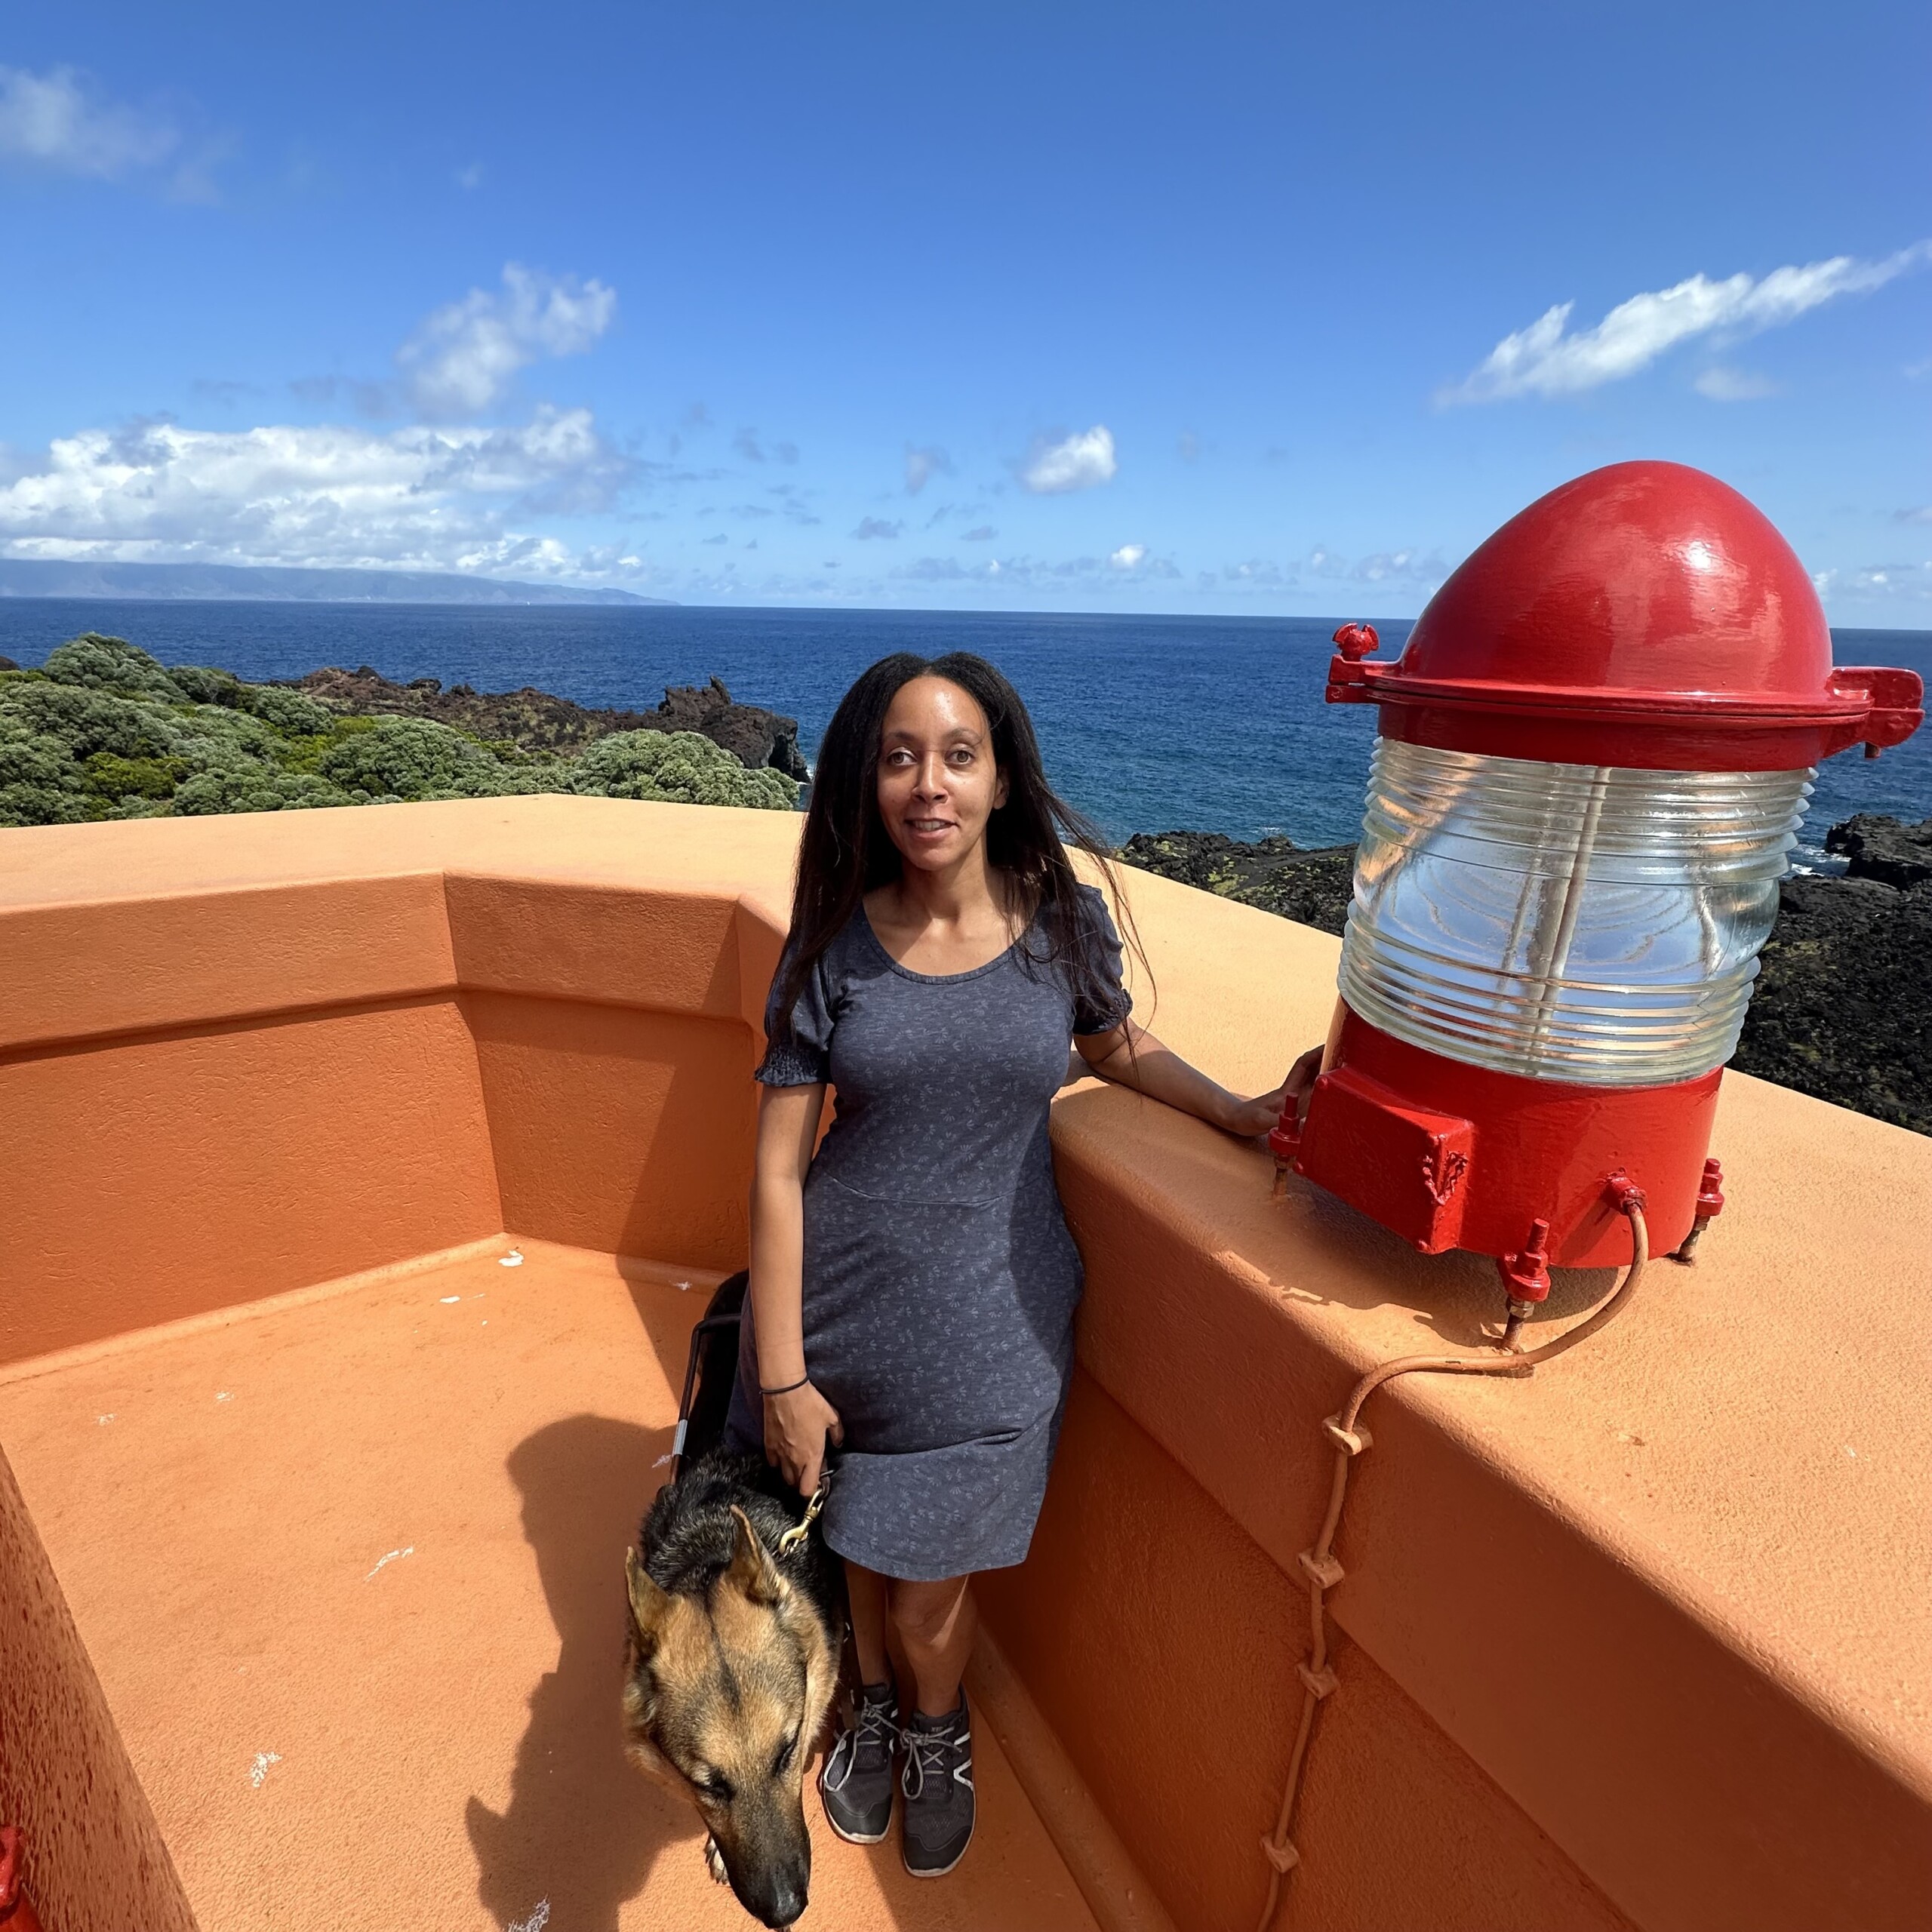 High up on the tower’s viewing platform, I stand beside an orange, waist-high wall where the reserve light happens to be perched. The large lantern has red along its top and bottom, and a silvery, translucent center. My guide dog Mylo looks alert beside me, and behind us, down below, appear the tops of trees, deep blue waters, and the shores of another island called São Jorge.